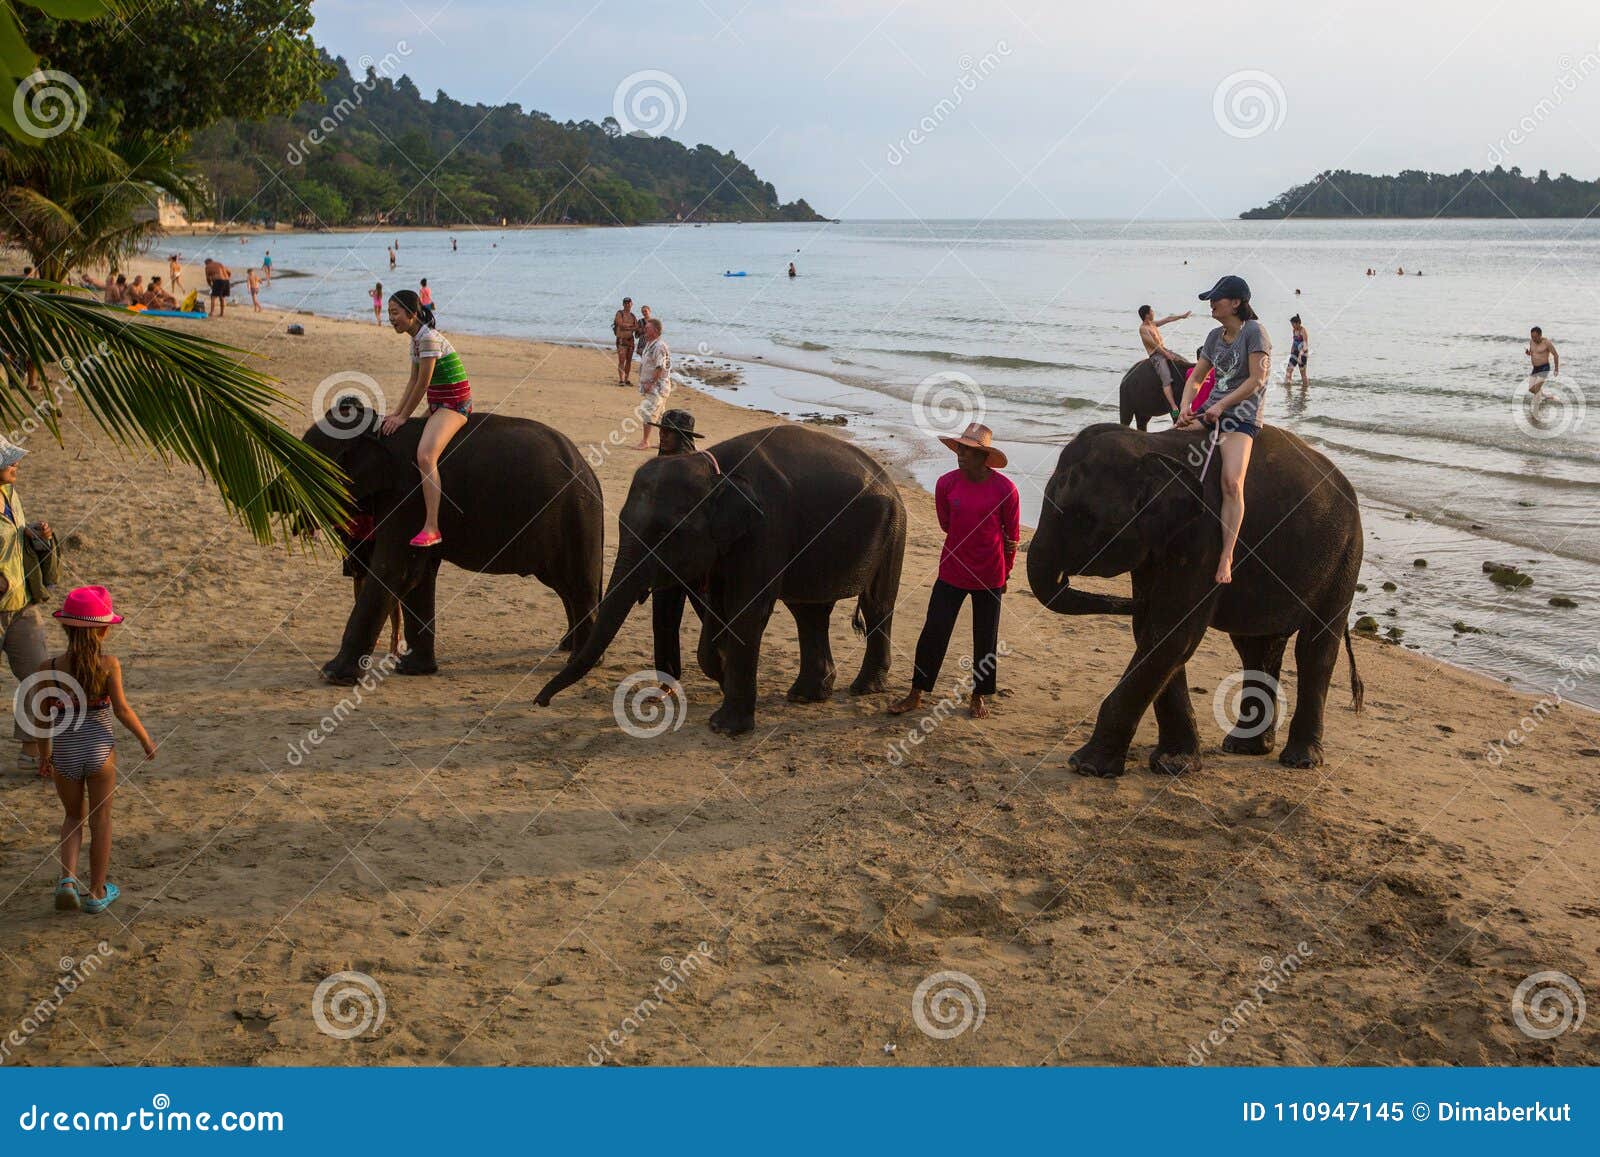 Elephants on the Island. from Farm Animals Nowadays Development of the  Tourism Industry Found a New Use for Elephants in Thailand Editorial Image  - Image of large, people: 110947145